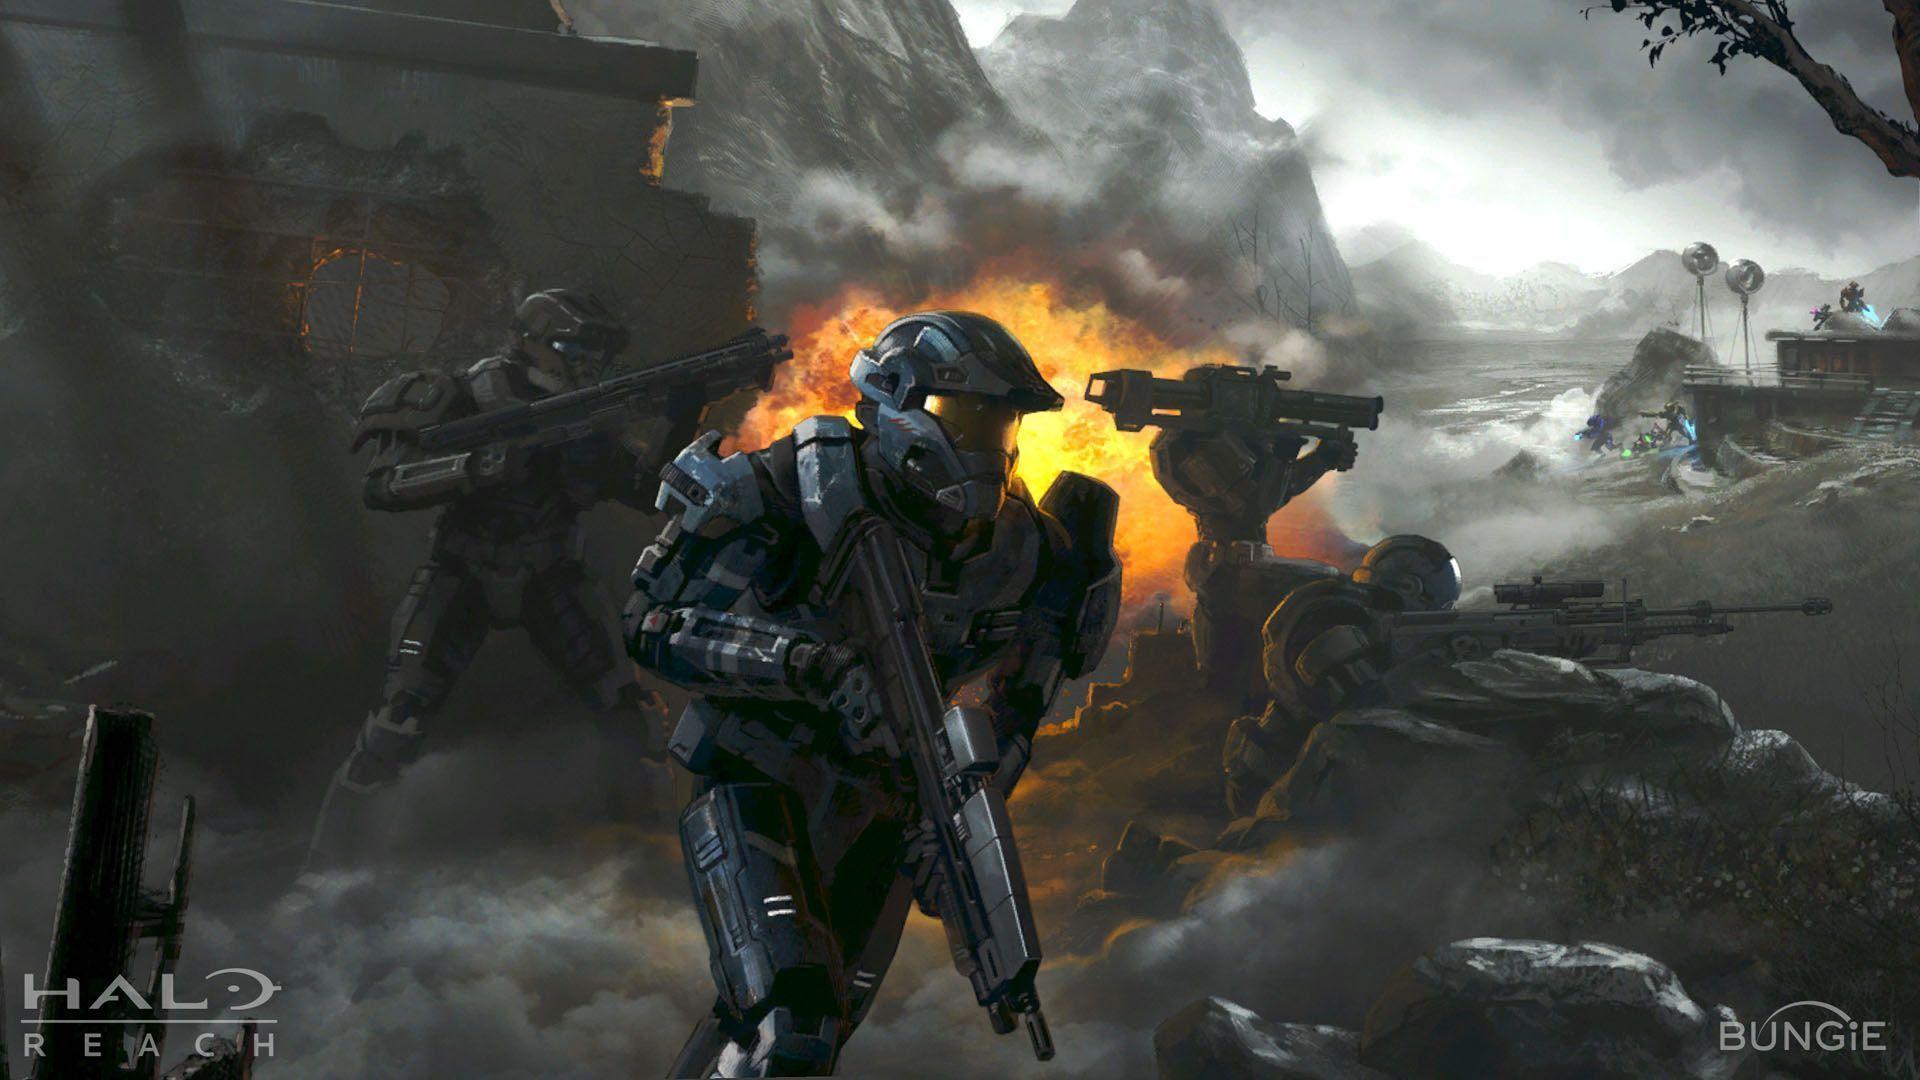 Wallpaper For > Cool Halo Reach Wallpaper